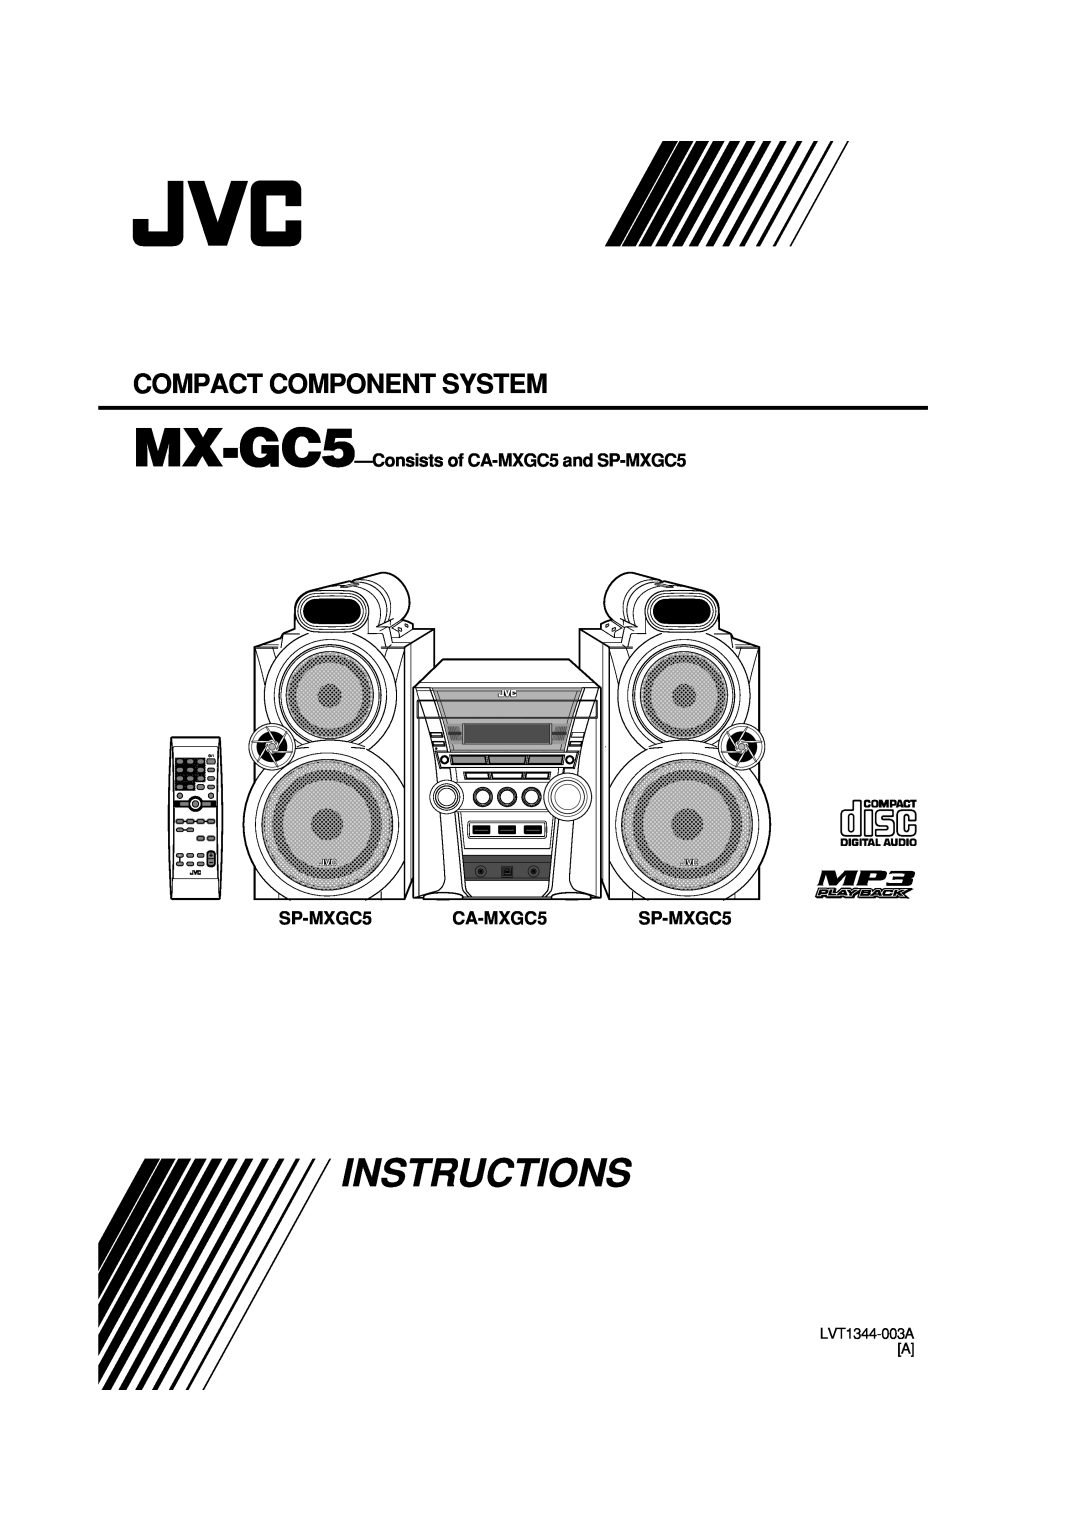 JVC manual Compact Component System, MX-GC5-Consistsof CA-MXGC5and SP-MXGC5, SP-MXGC5 CA-MXGC5 SP-MXGC5, Instructions 